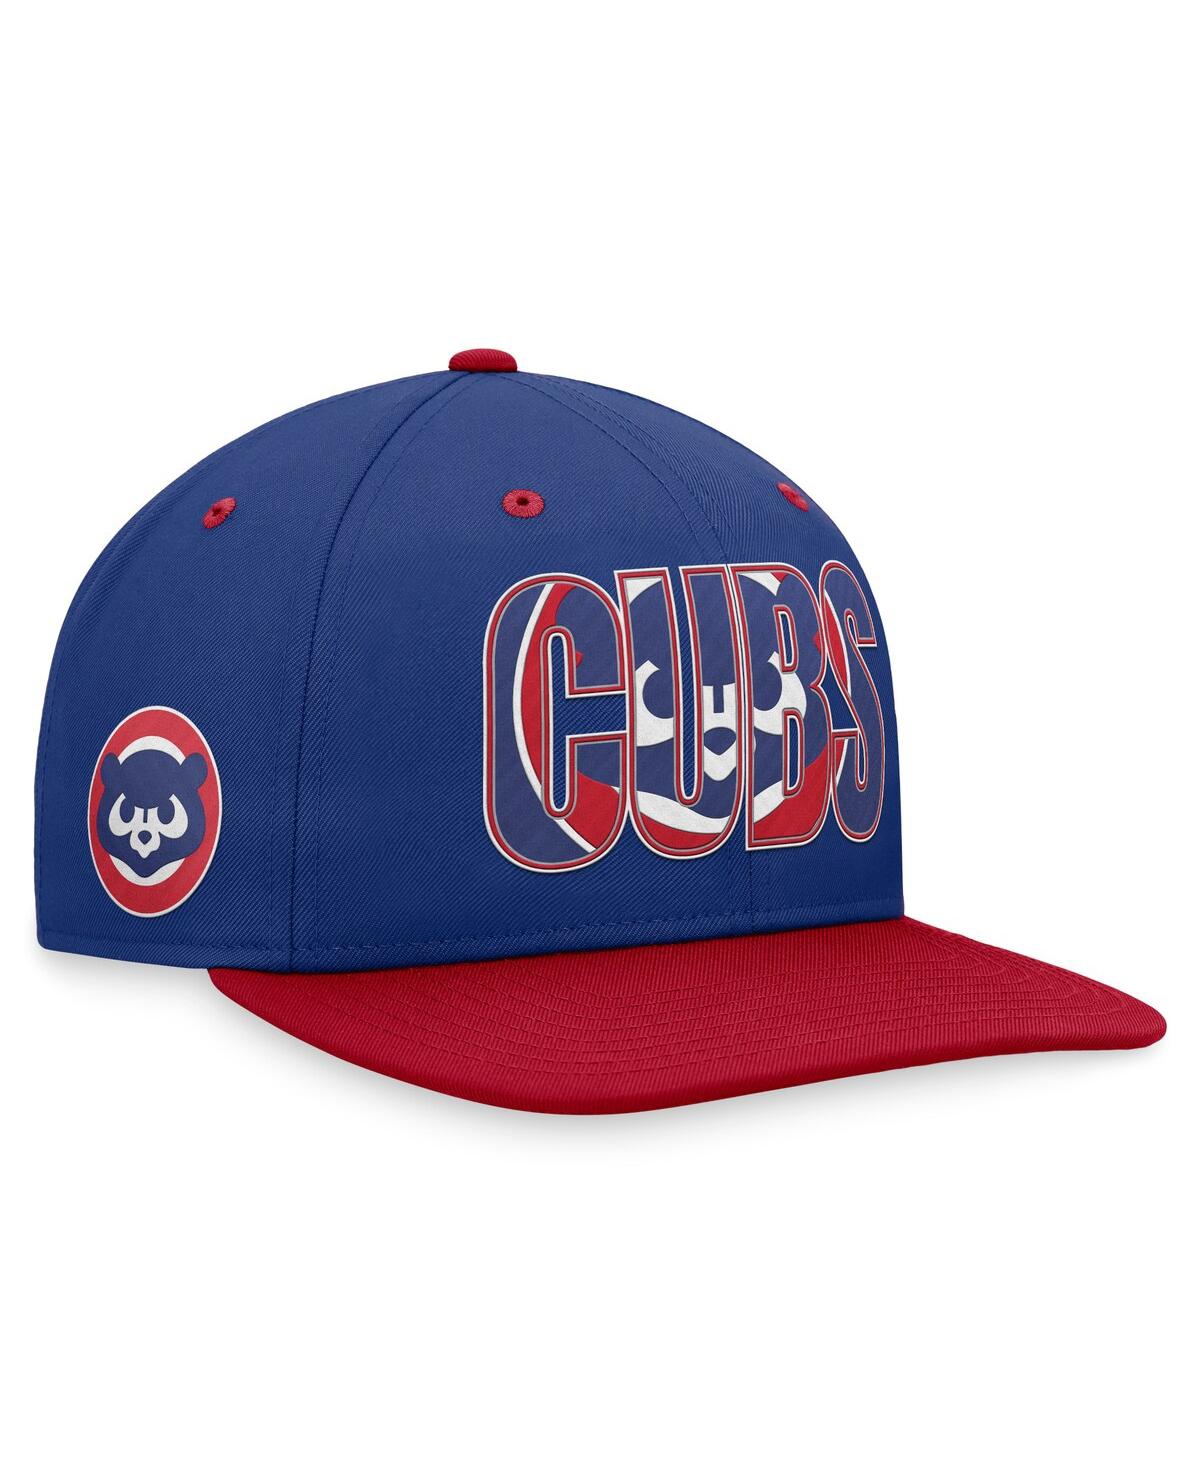 Shop Nike Men's  Royal Chicago Cubs Cooperstown Collection Pro Snapback Hat